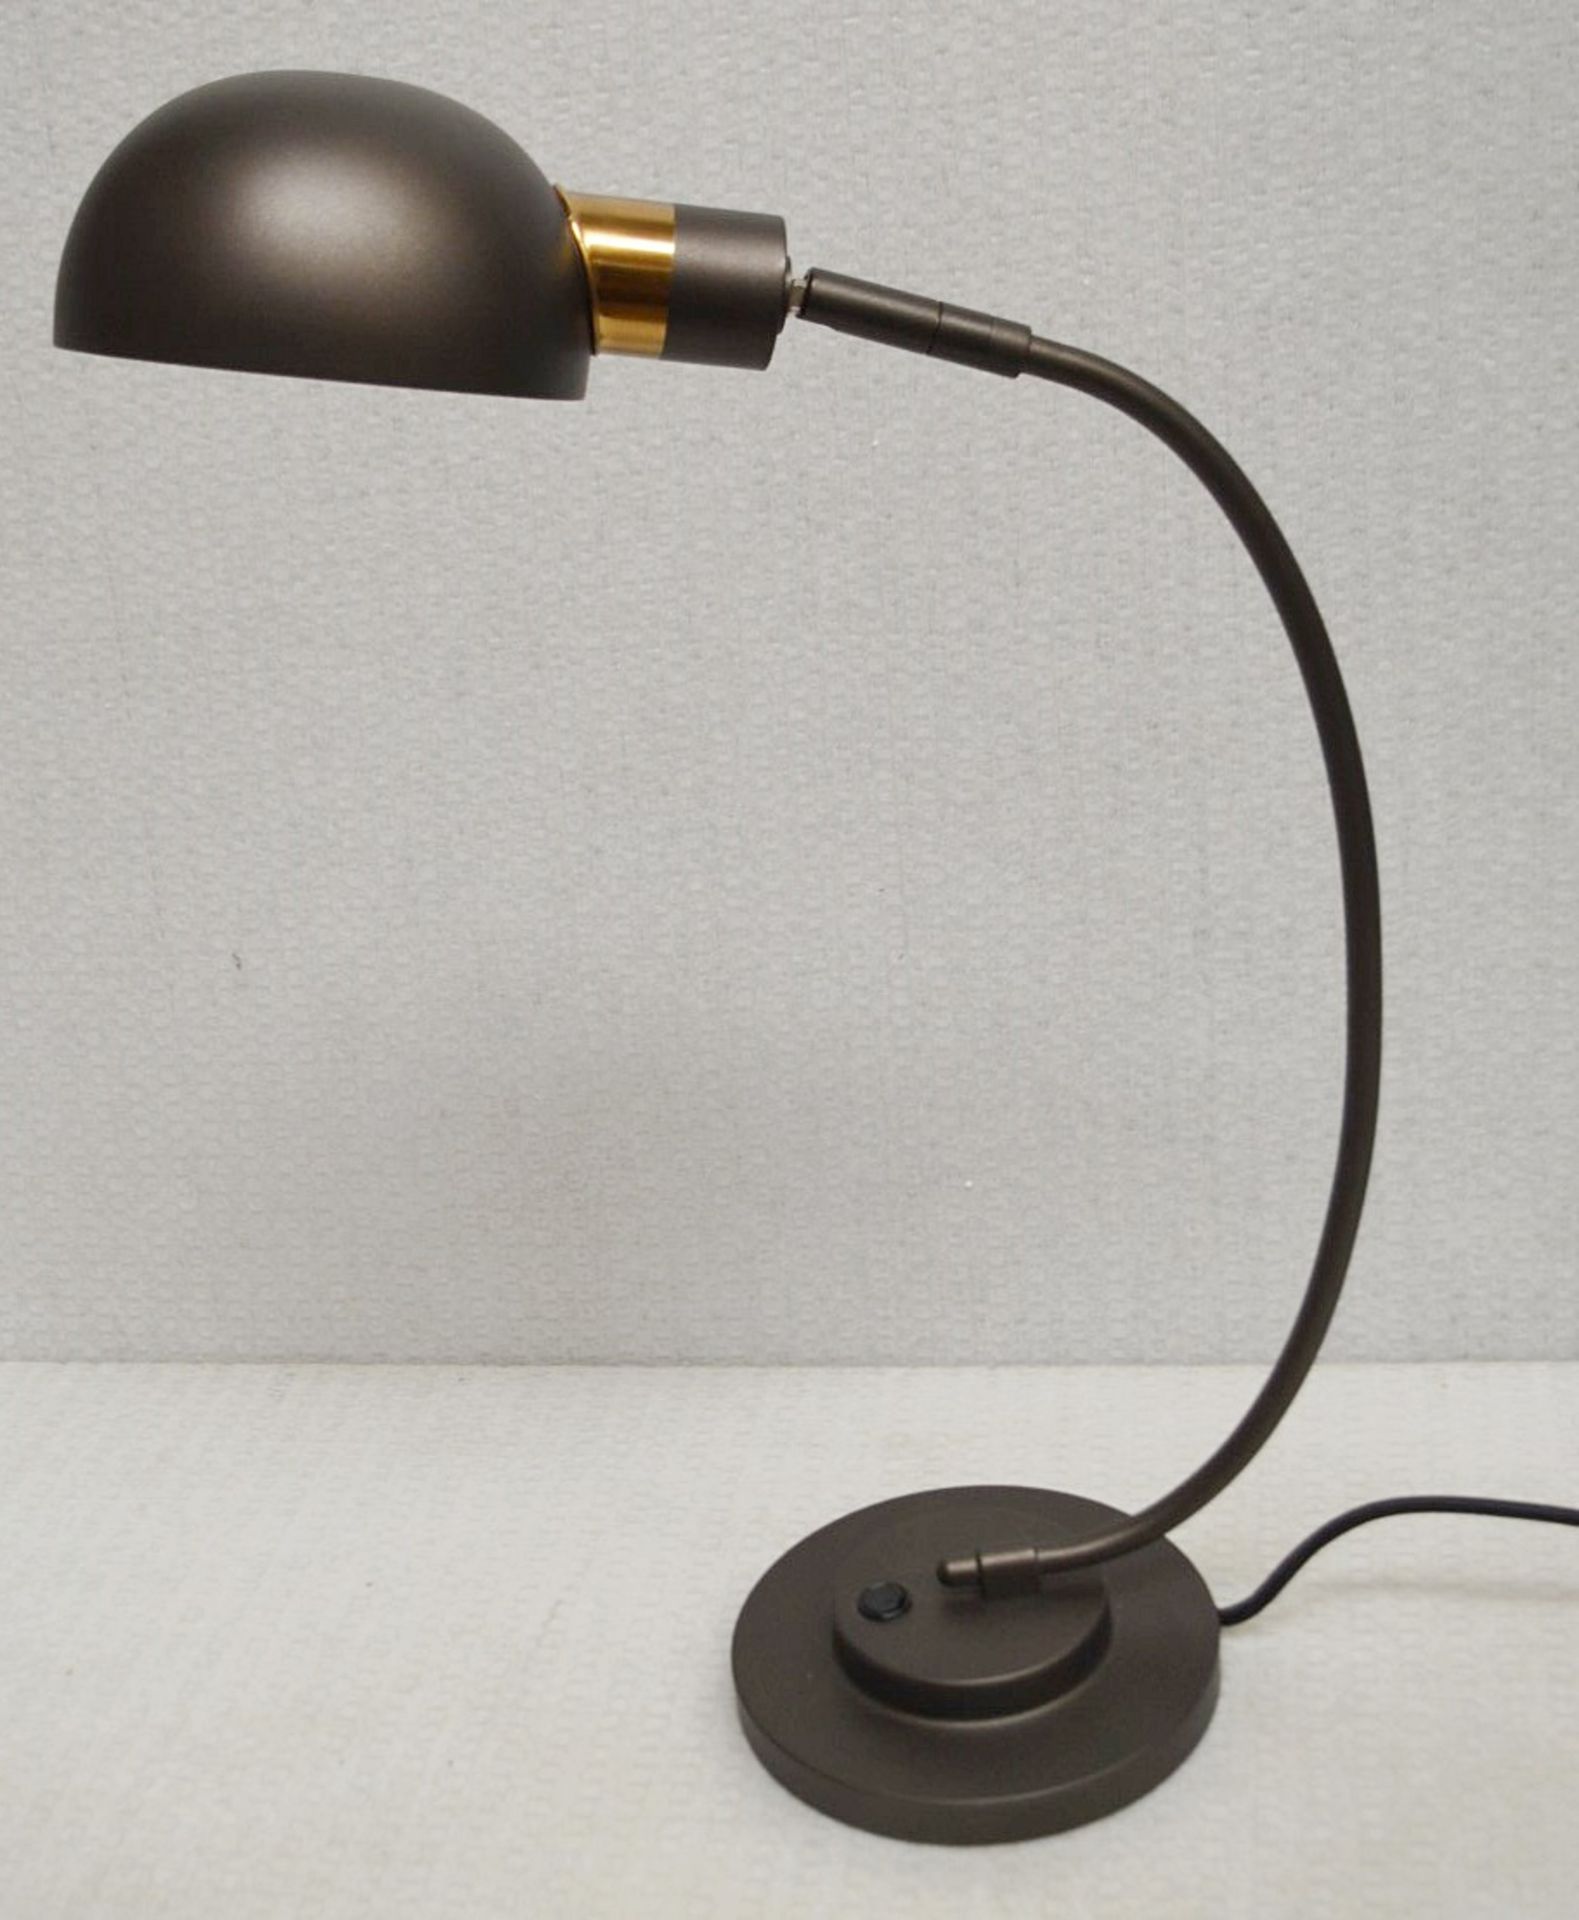 1 x CHELSOM Desk Table Lamp In A Black Bronze Finish With Polished Brass Accent